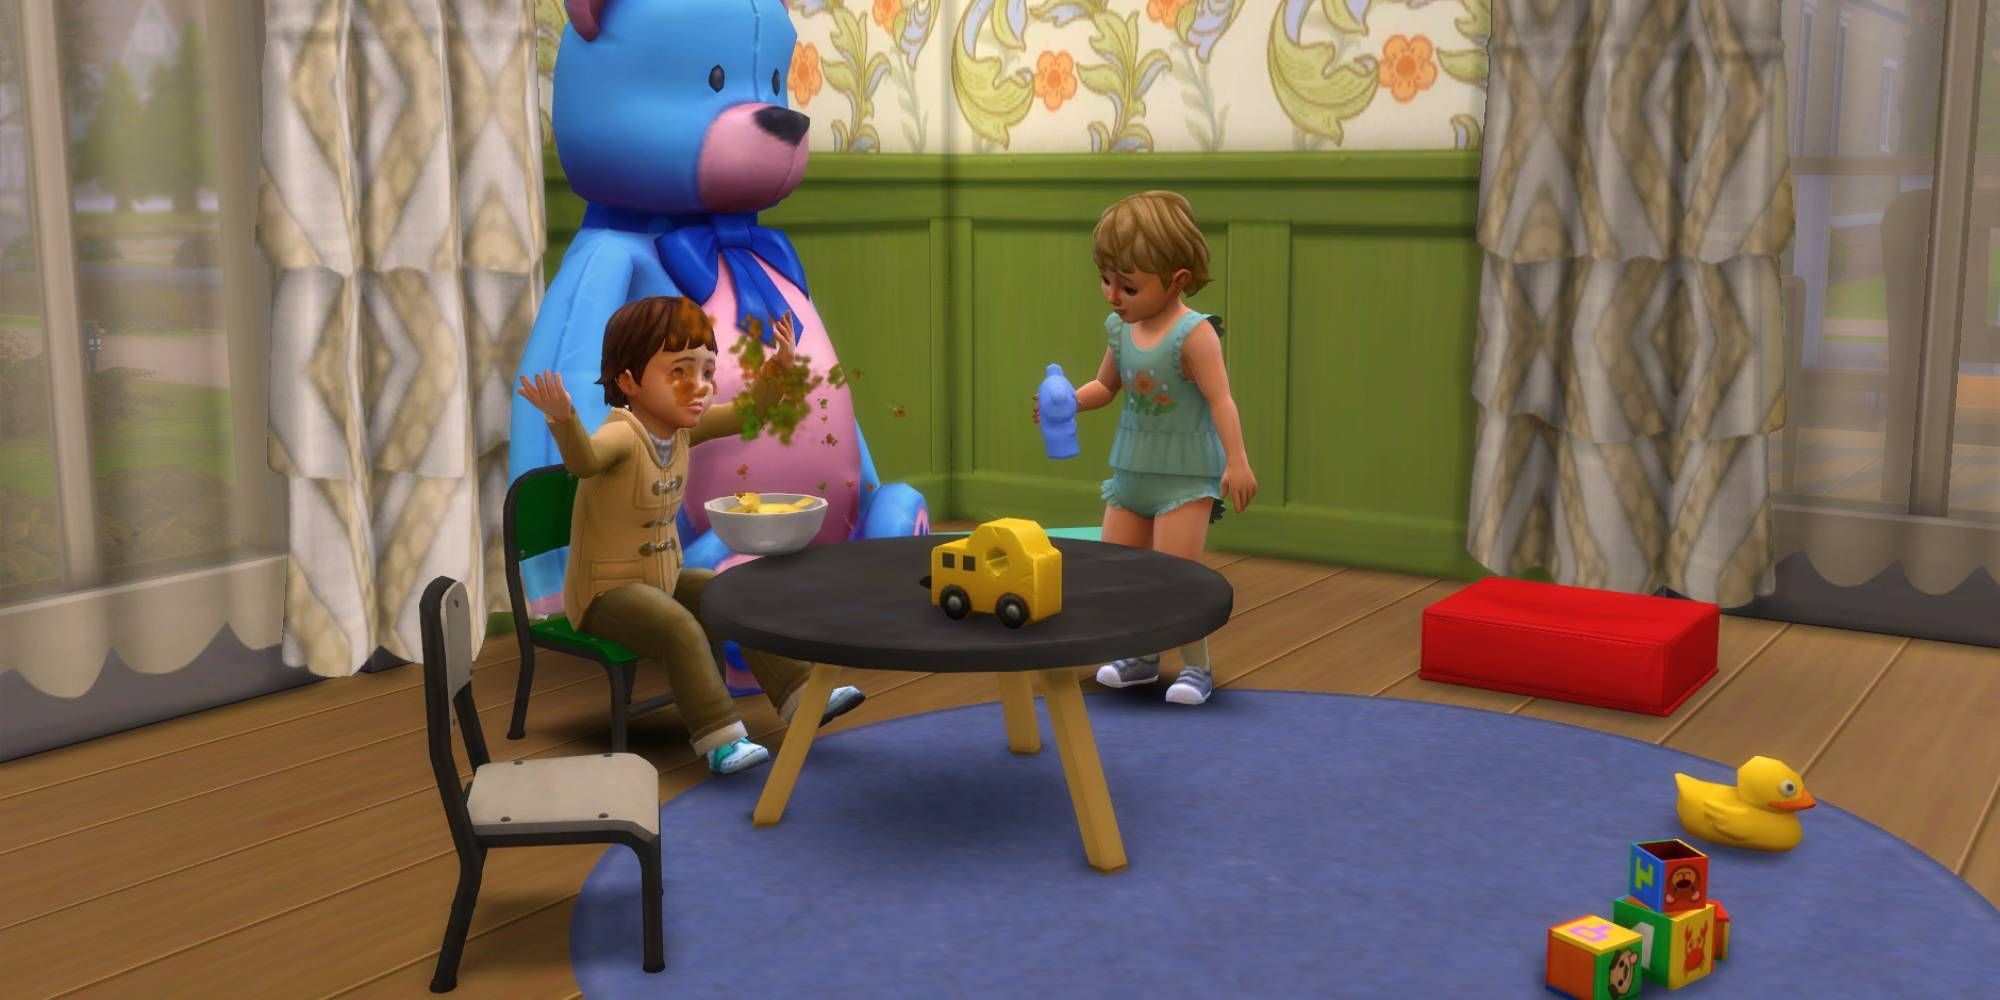 Toddlers in The Sims 4 using a table and chair set sized perfectly for them